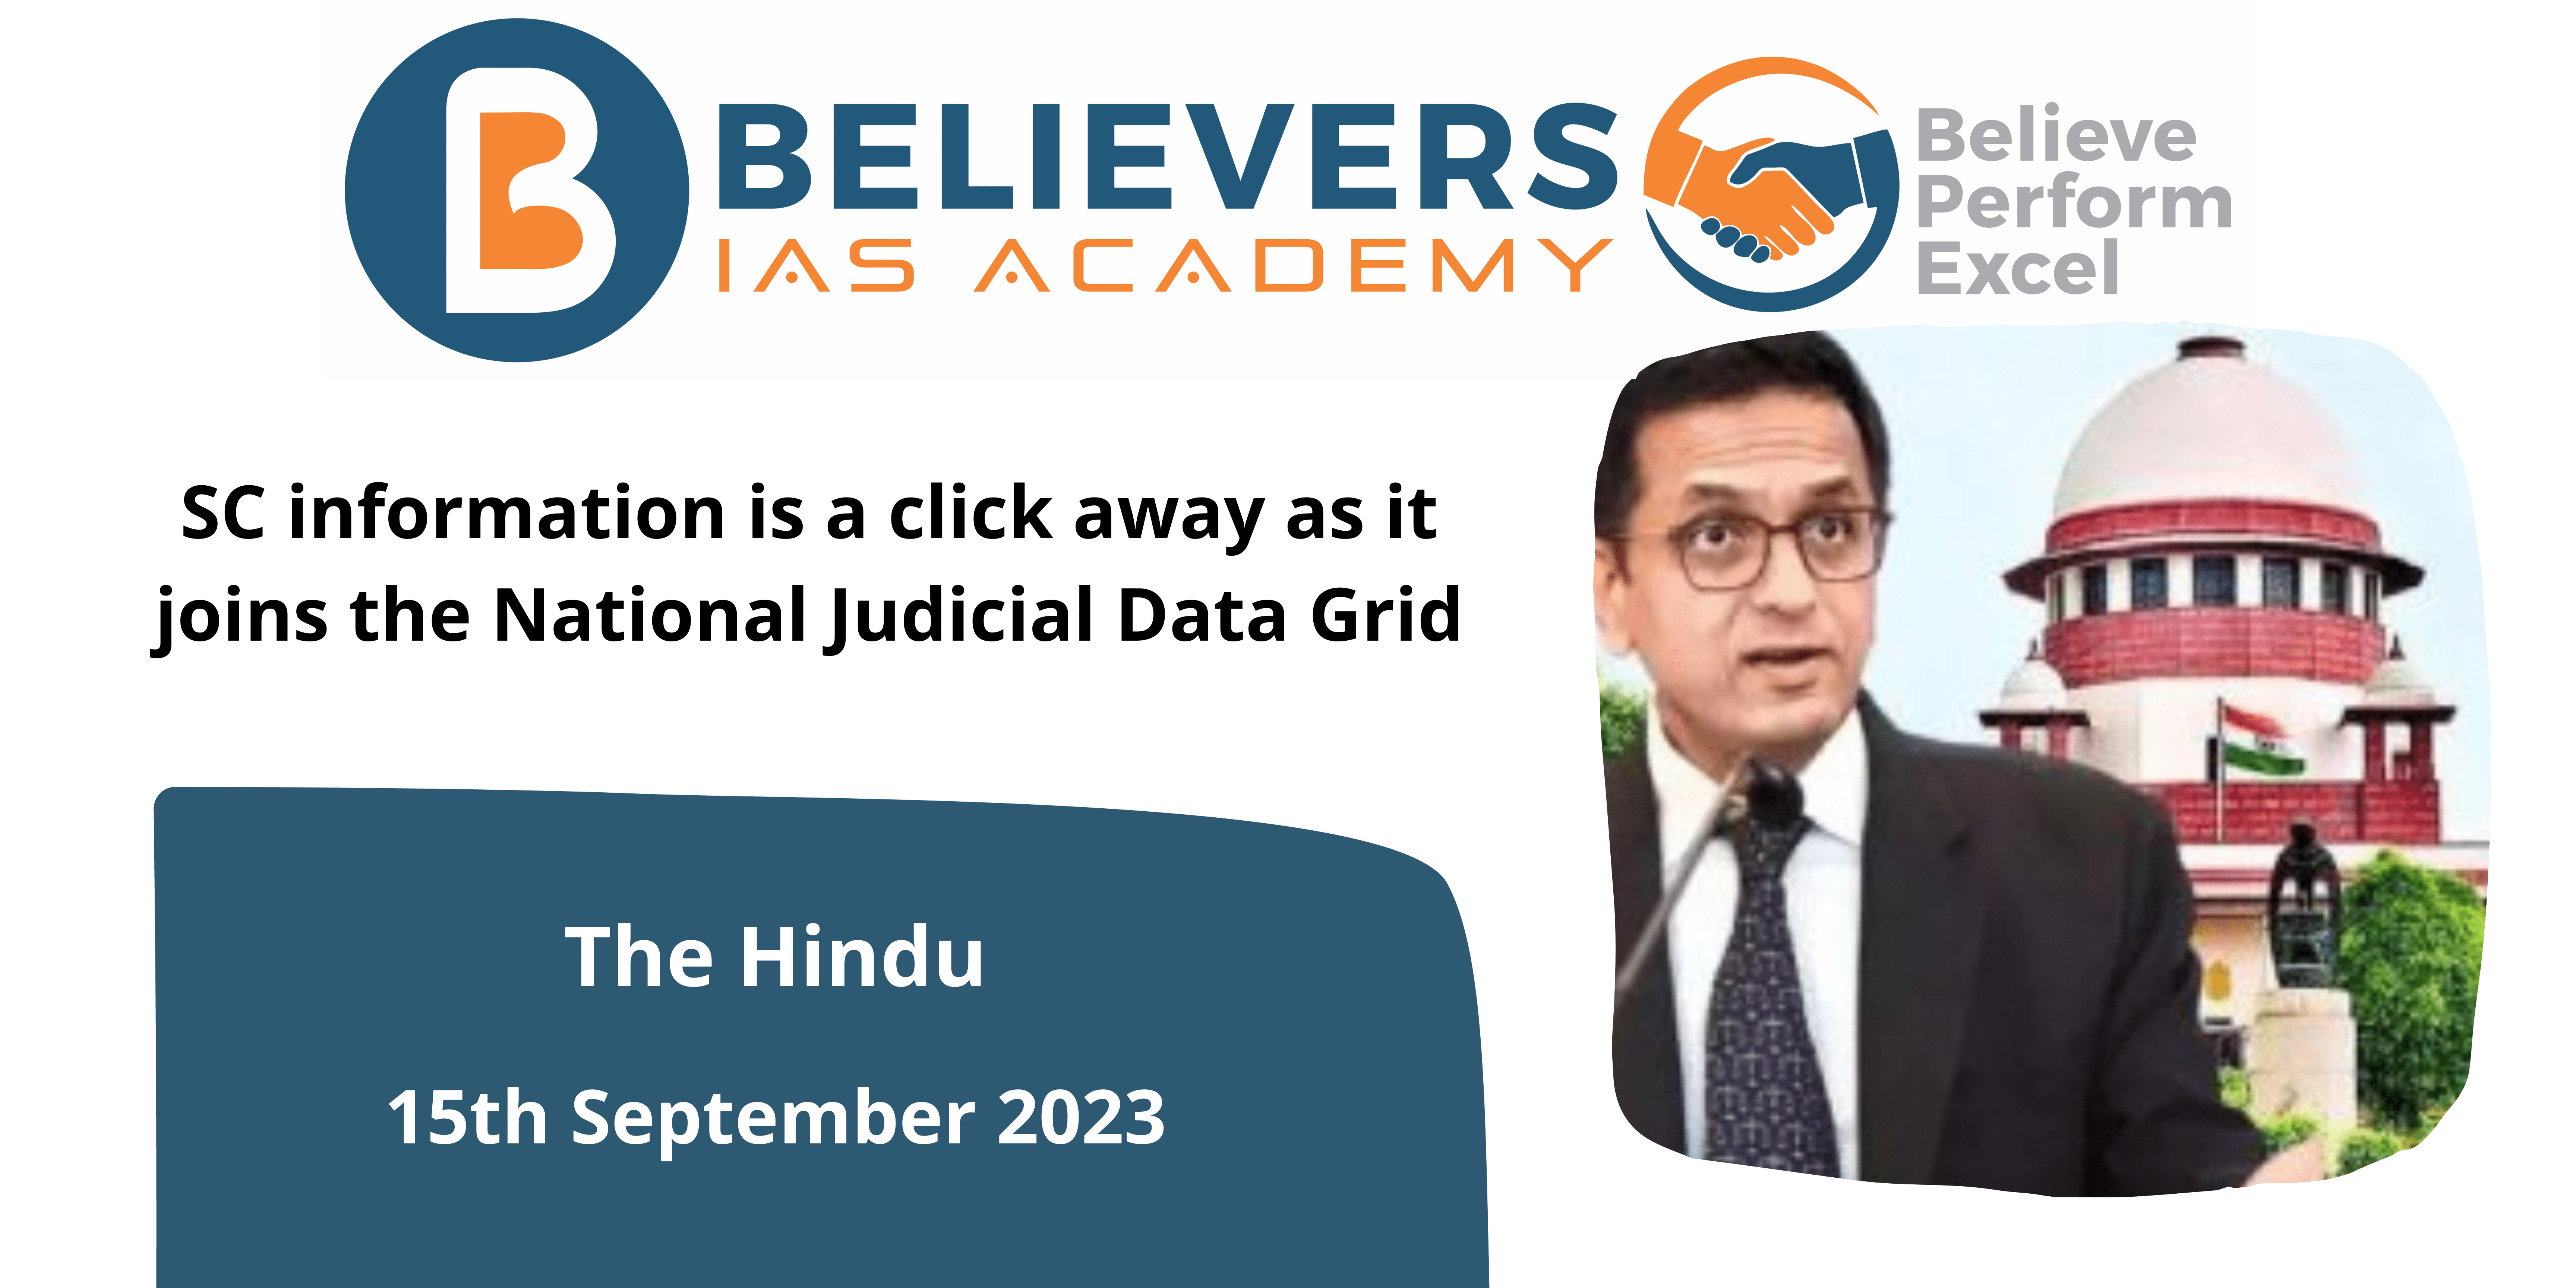 SC information is a click away as it joins the National Judicial Data Grid